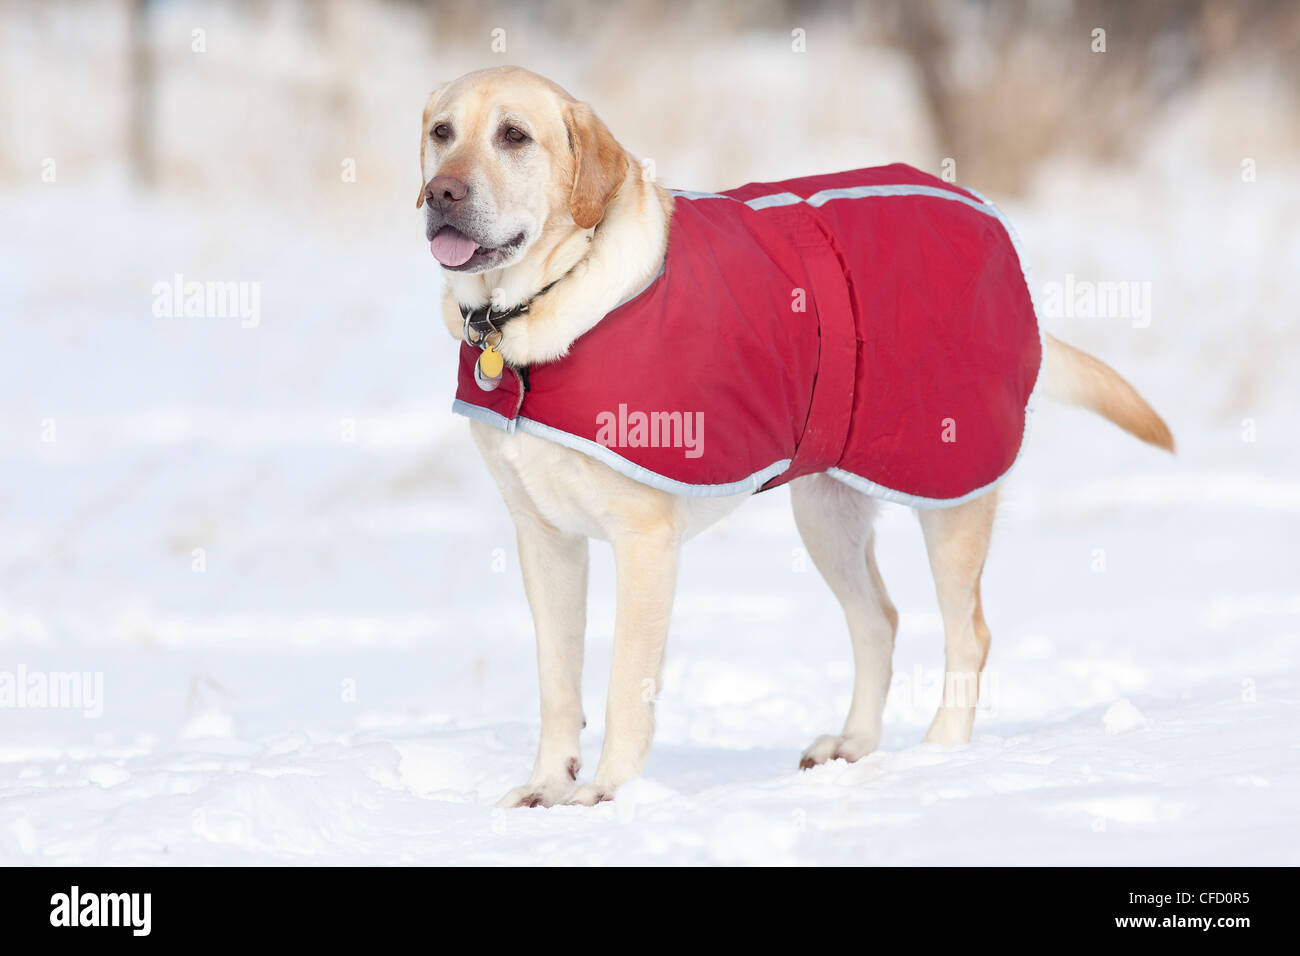 Yellow Labrador Retriever dog wearing his coat, on a cold winter day. Assiniboine Forest, Winnipeg, Manitoba, Canada. Stock Photo